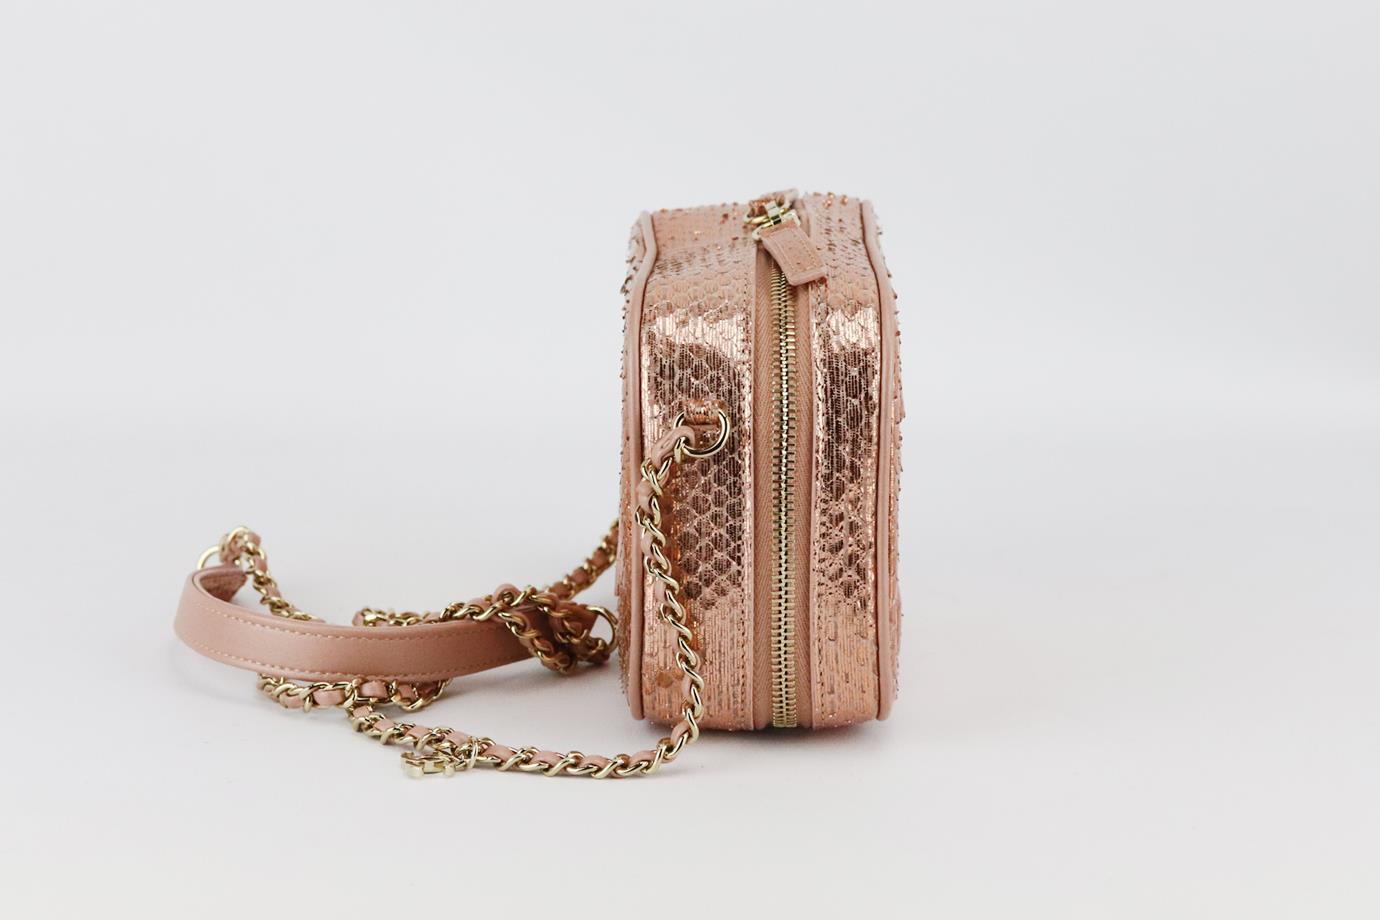 Chanel 2019 Mania Camera Case metallic python and leather shoulder bag. Made from rose-gold python and leather with large CC on the front, it has a large internal compartment with slit pocket. Rose-gold. Zip fastening at top. Does not come with